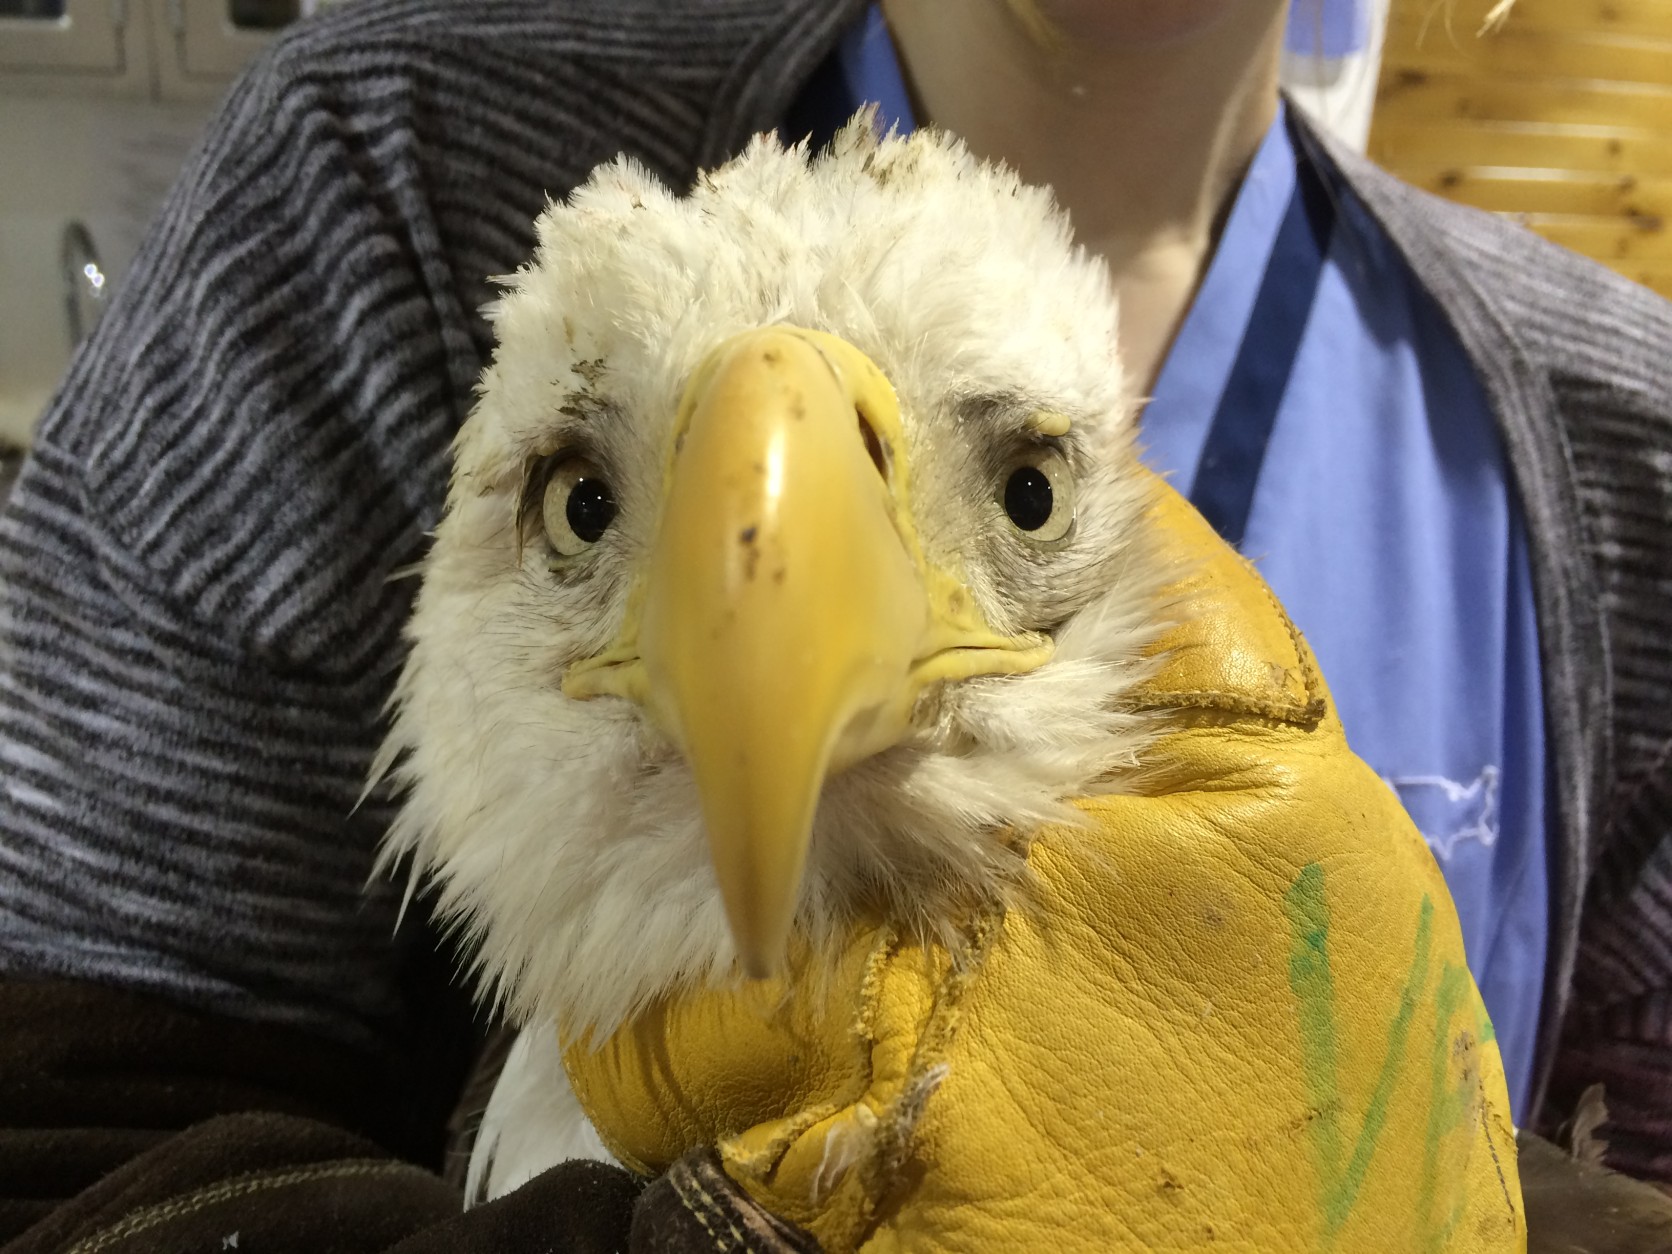 This eagle suffered from lead poisoning and subsequently passed away. (Courtesy  Wildlife Center Va)